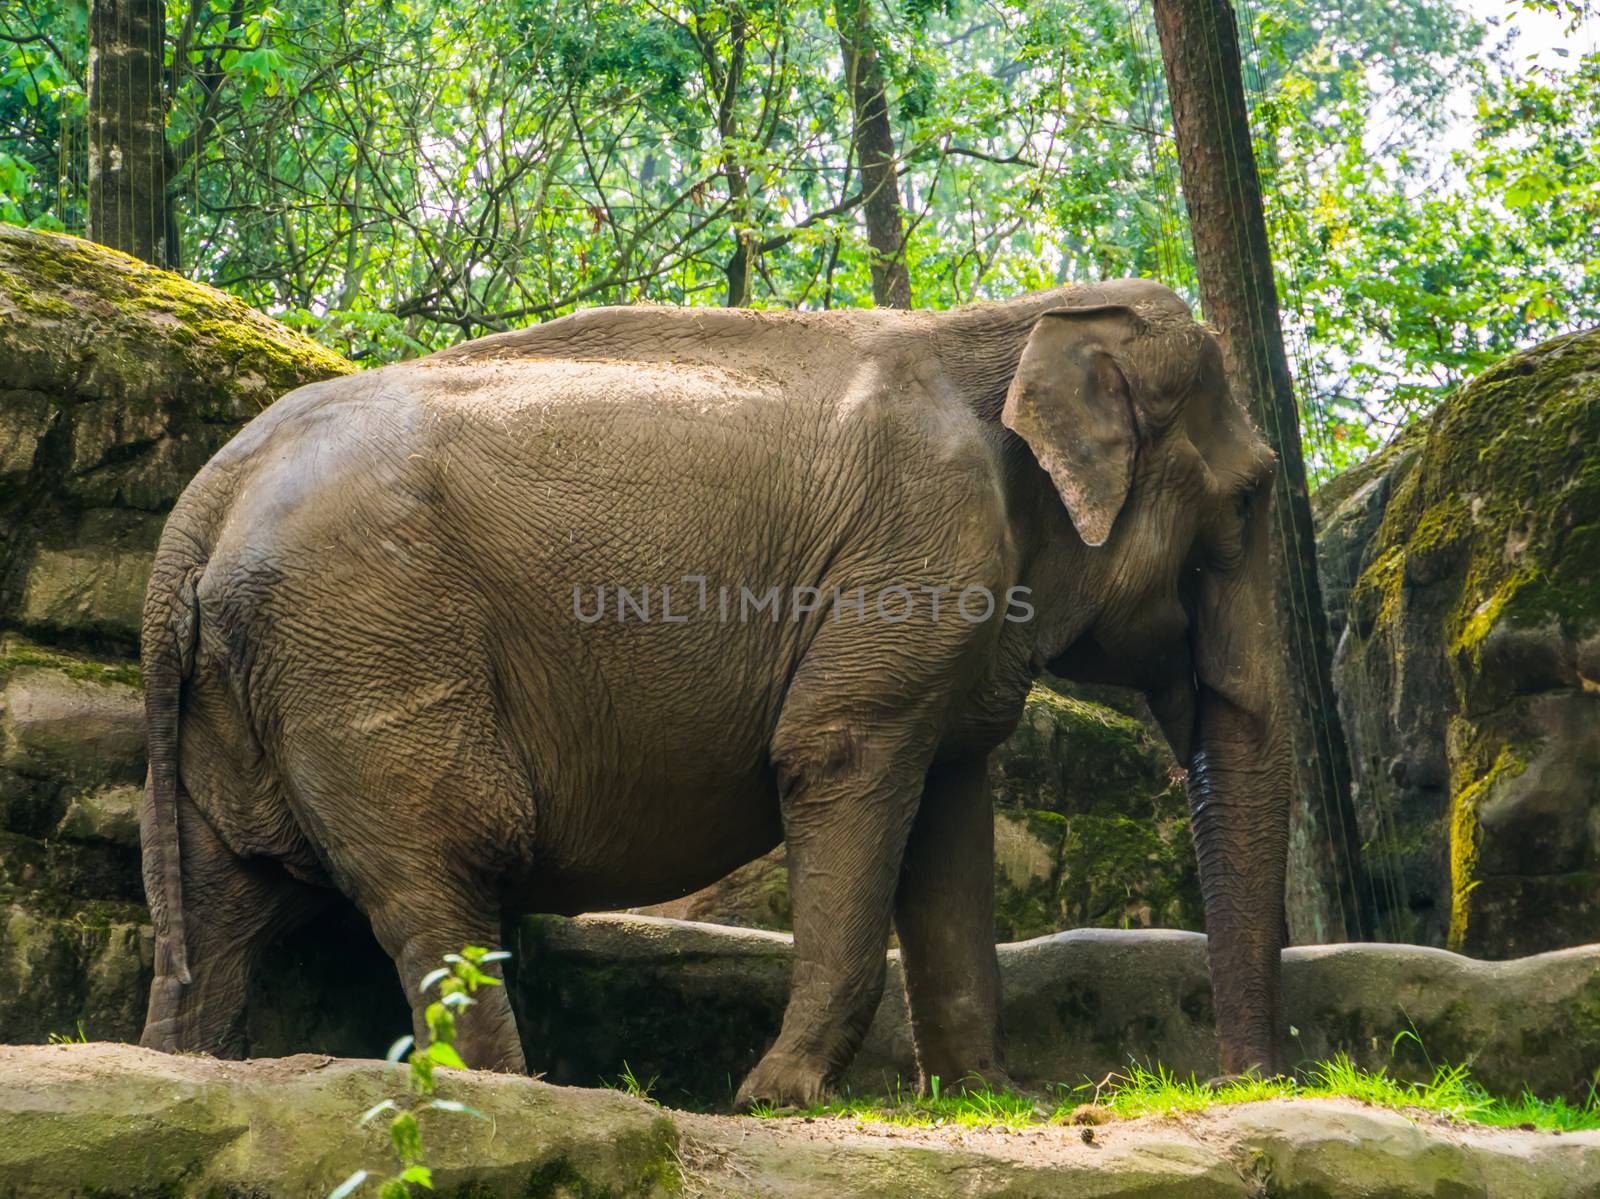 closeup portrait of a Asian elephant, Endangered animal specie from Asia